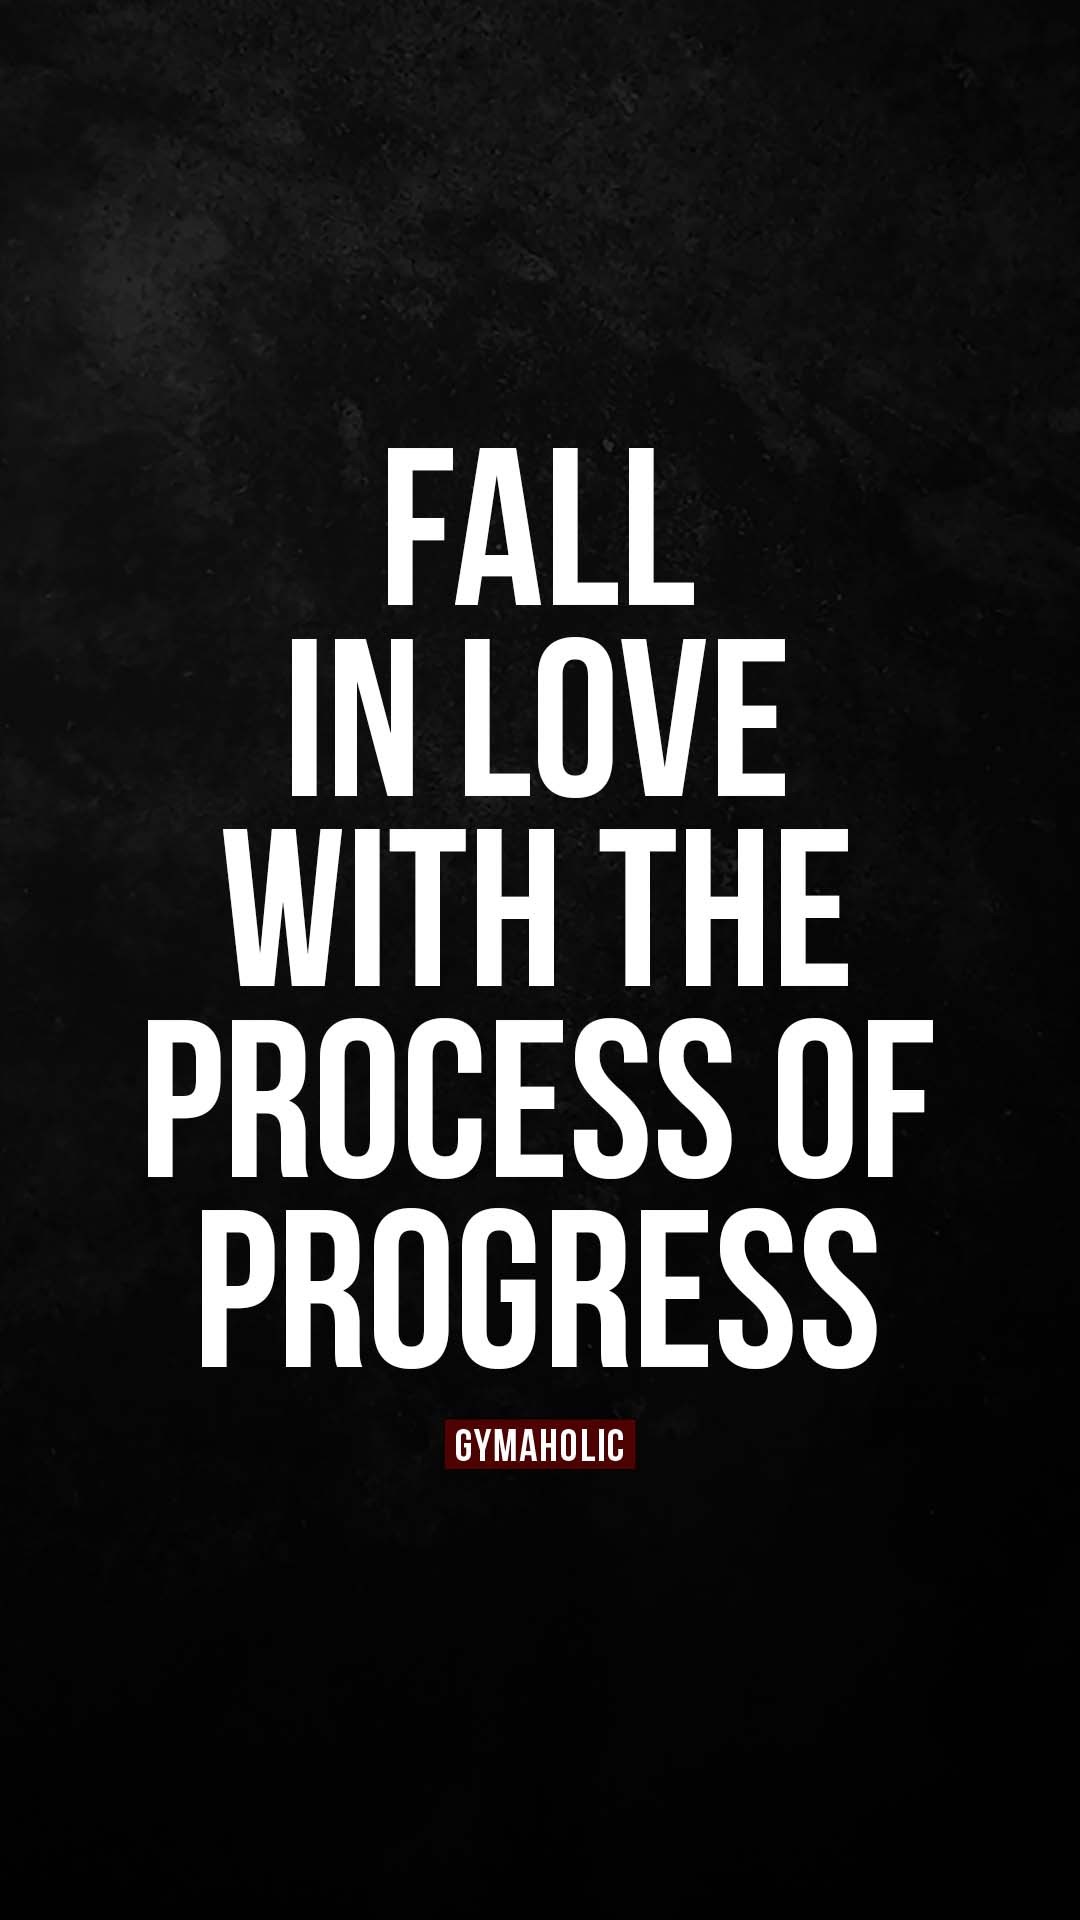 Fall in love with the process of progress